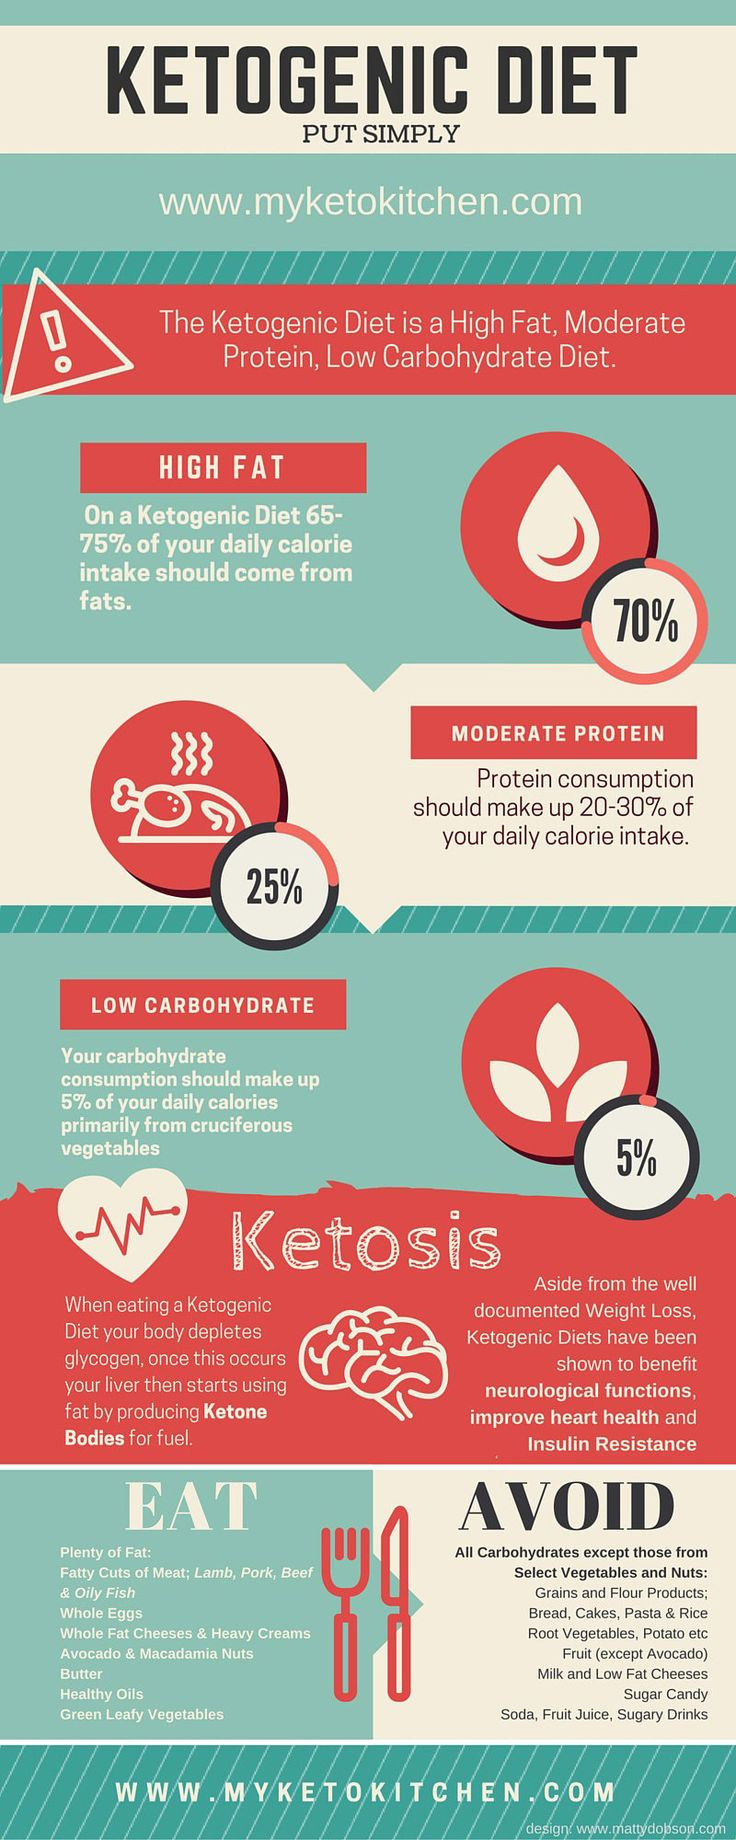 Keto Diet Is It Healthy
 54 best images about Neurofibromatosis NF1 on Pinterest